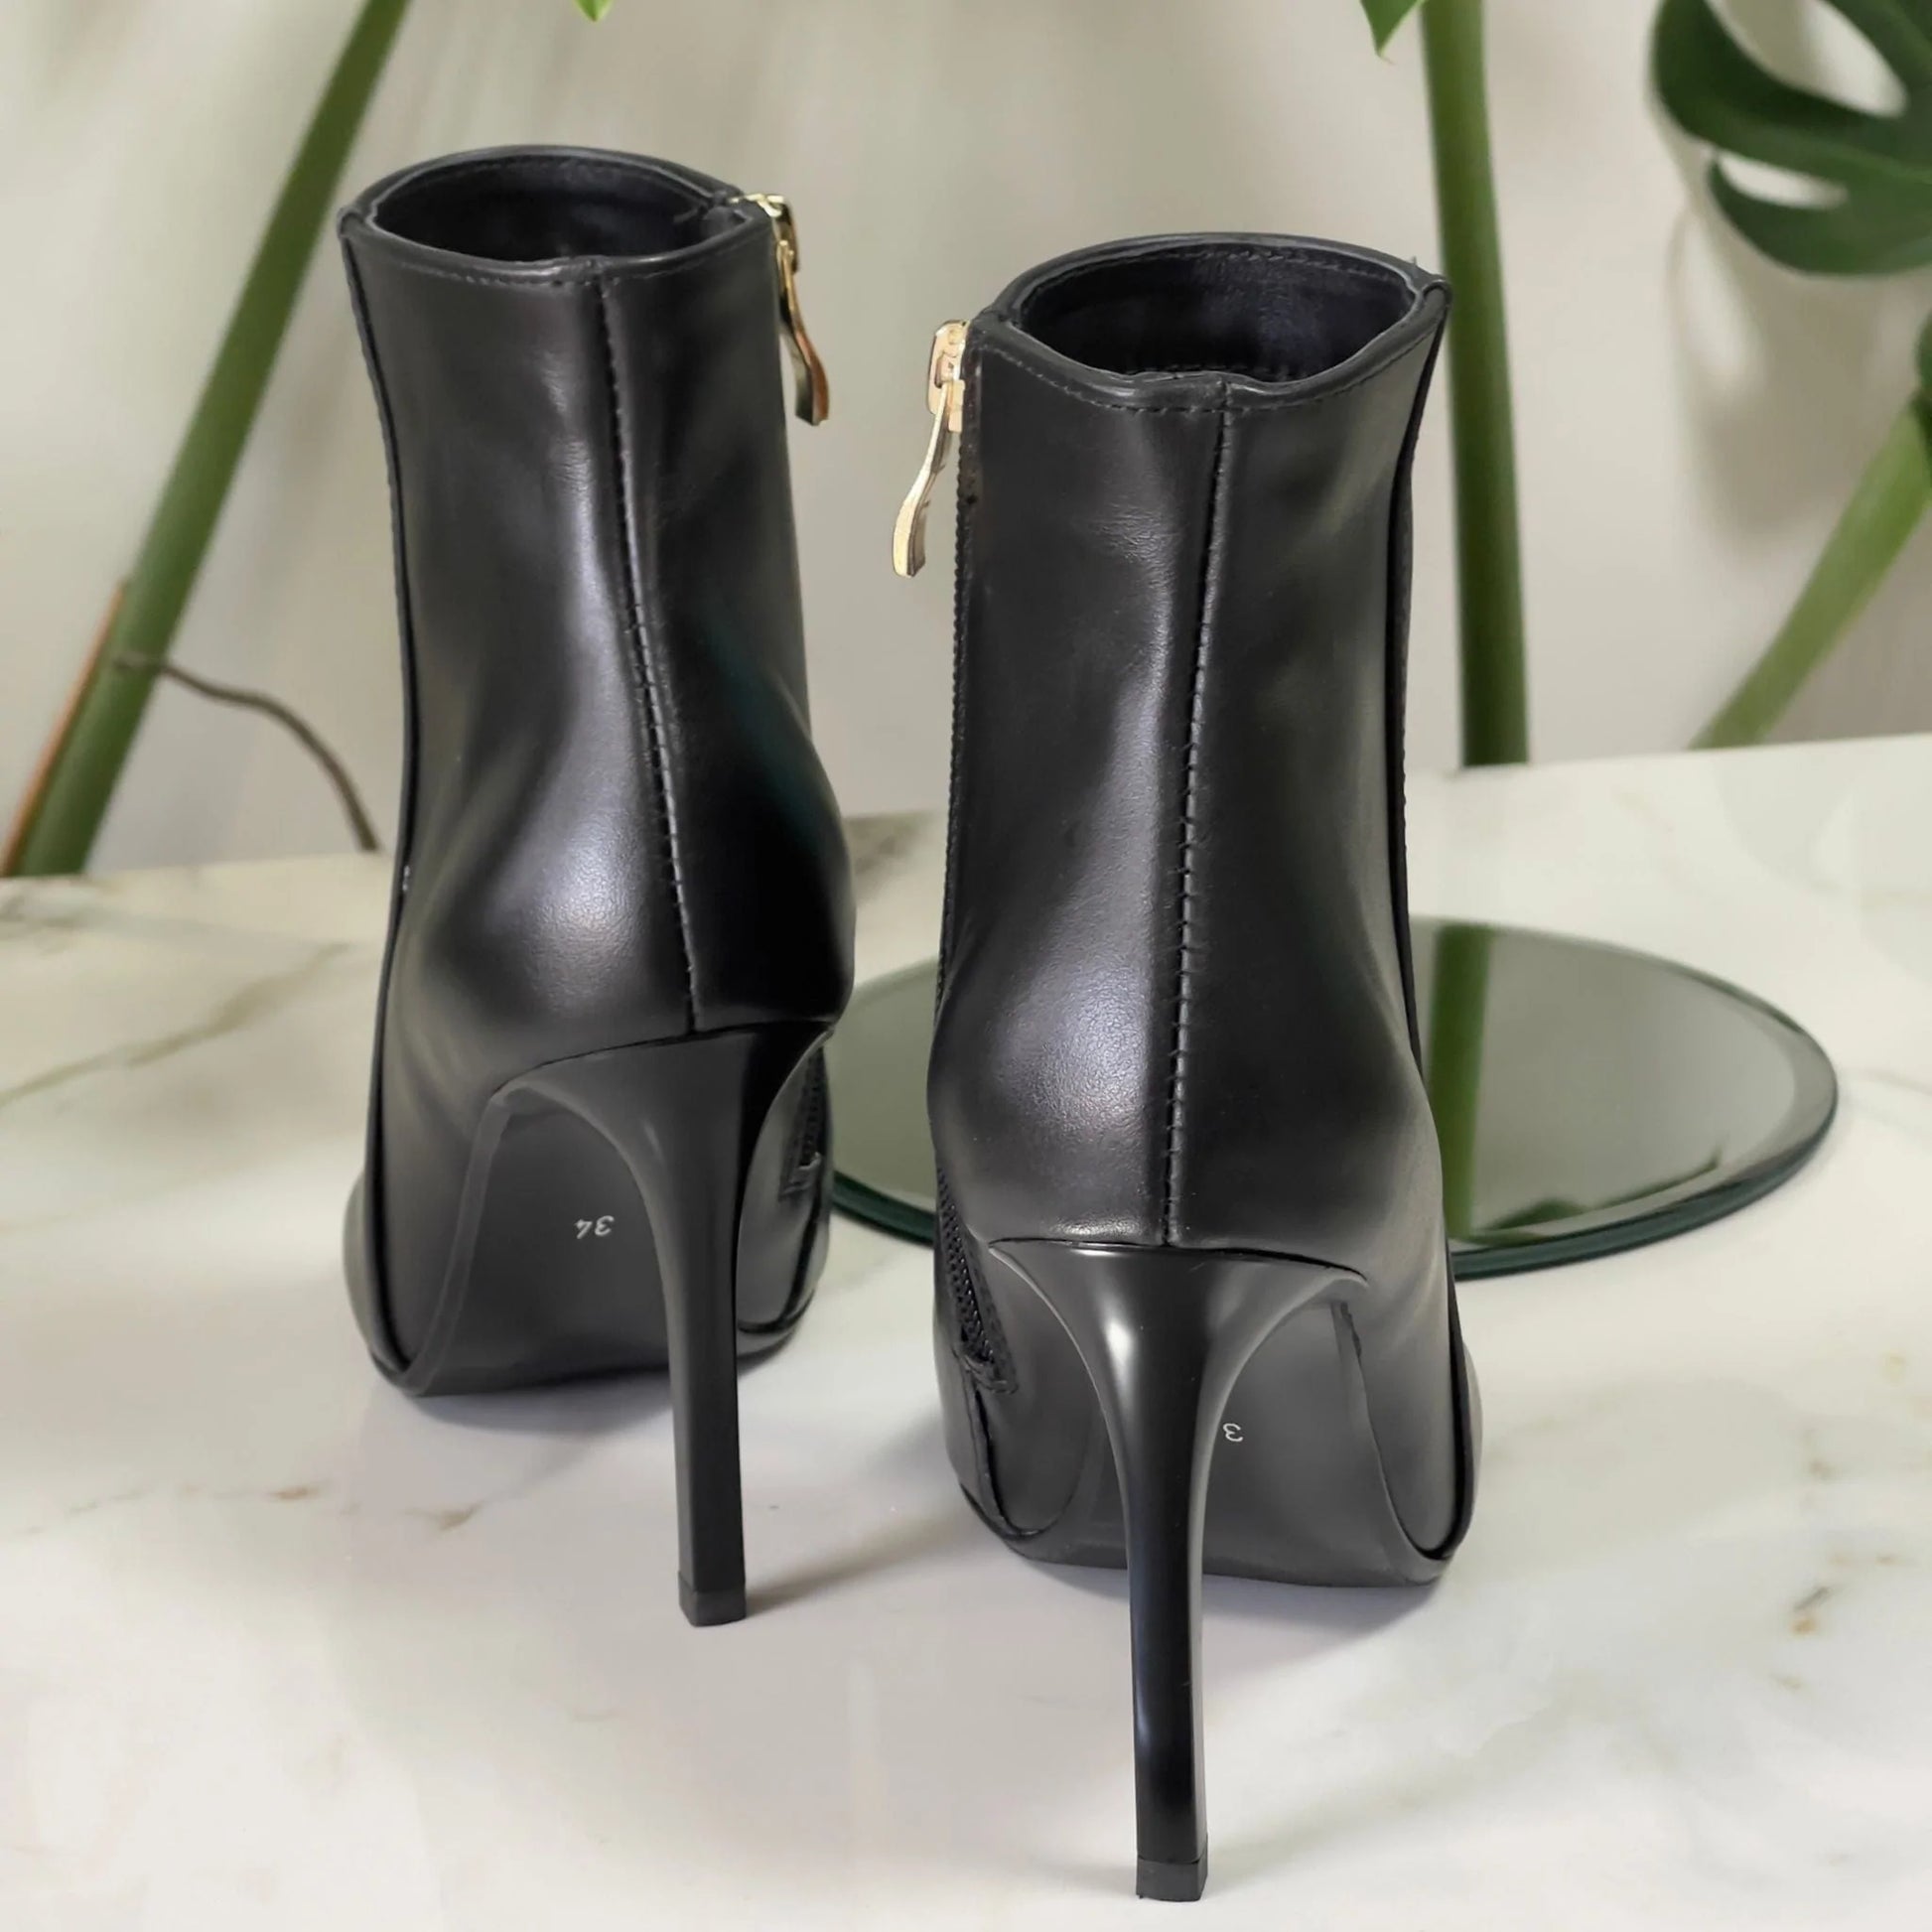 Small size ladies ankle boots in black leather